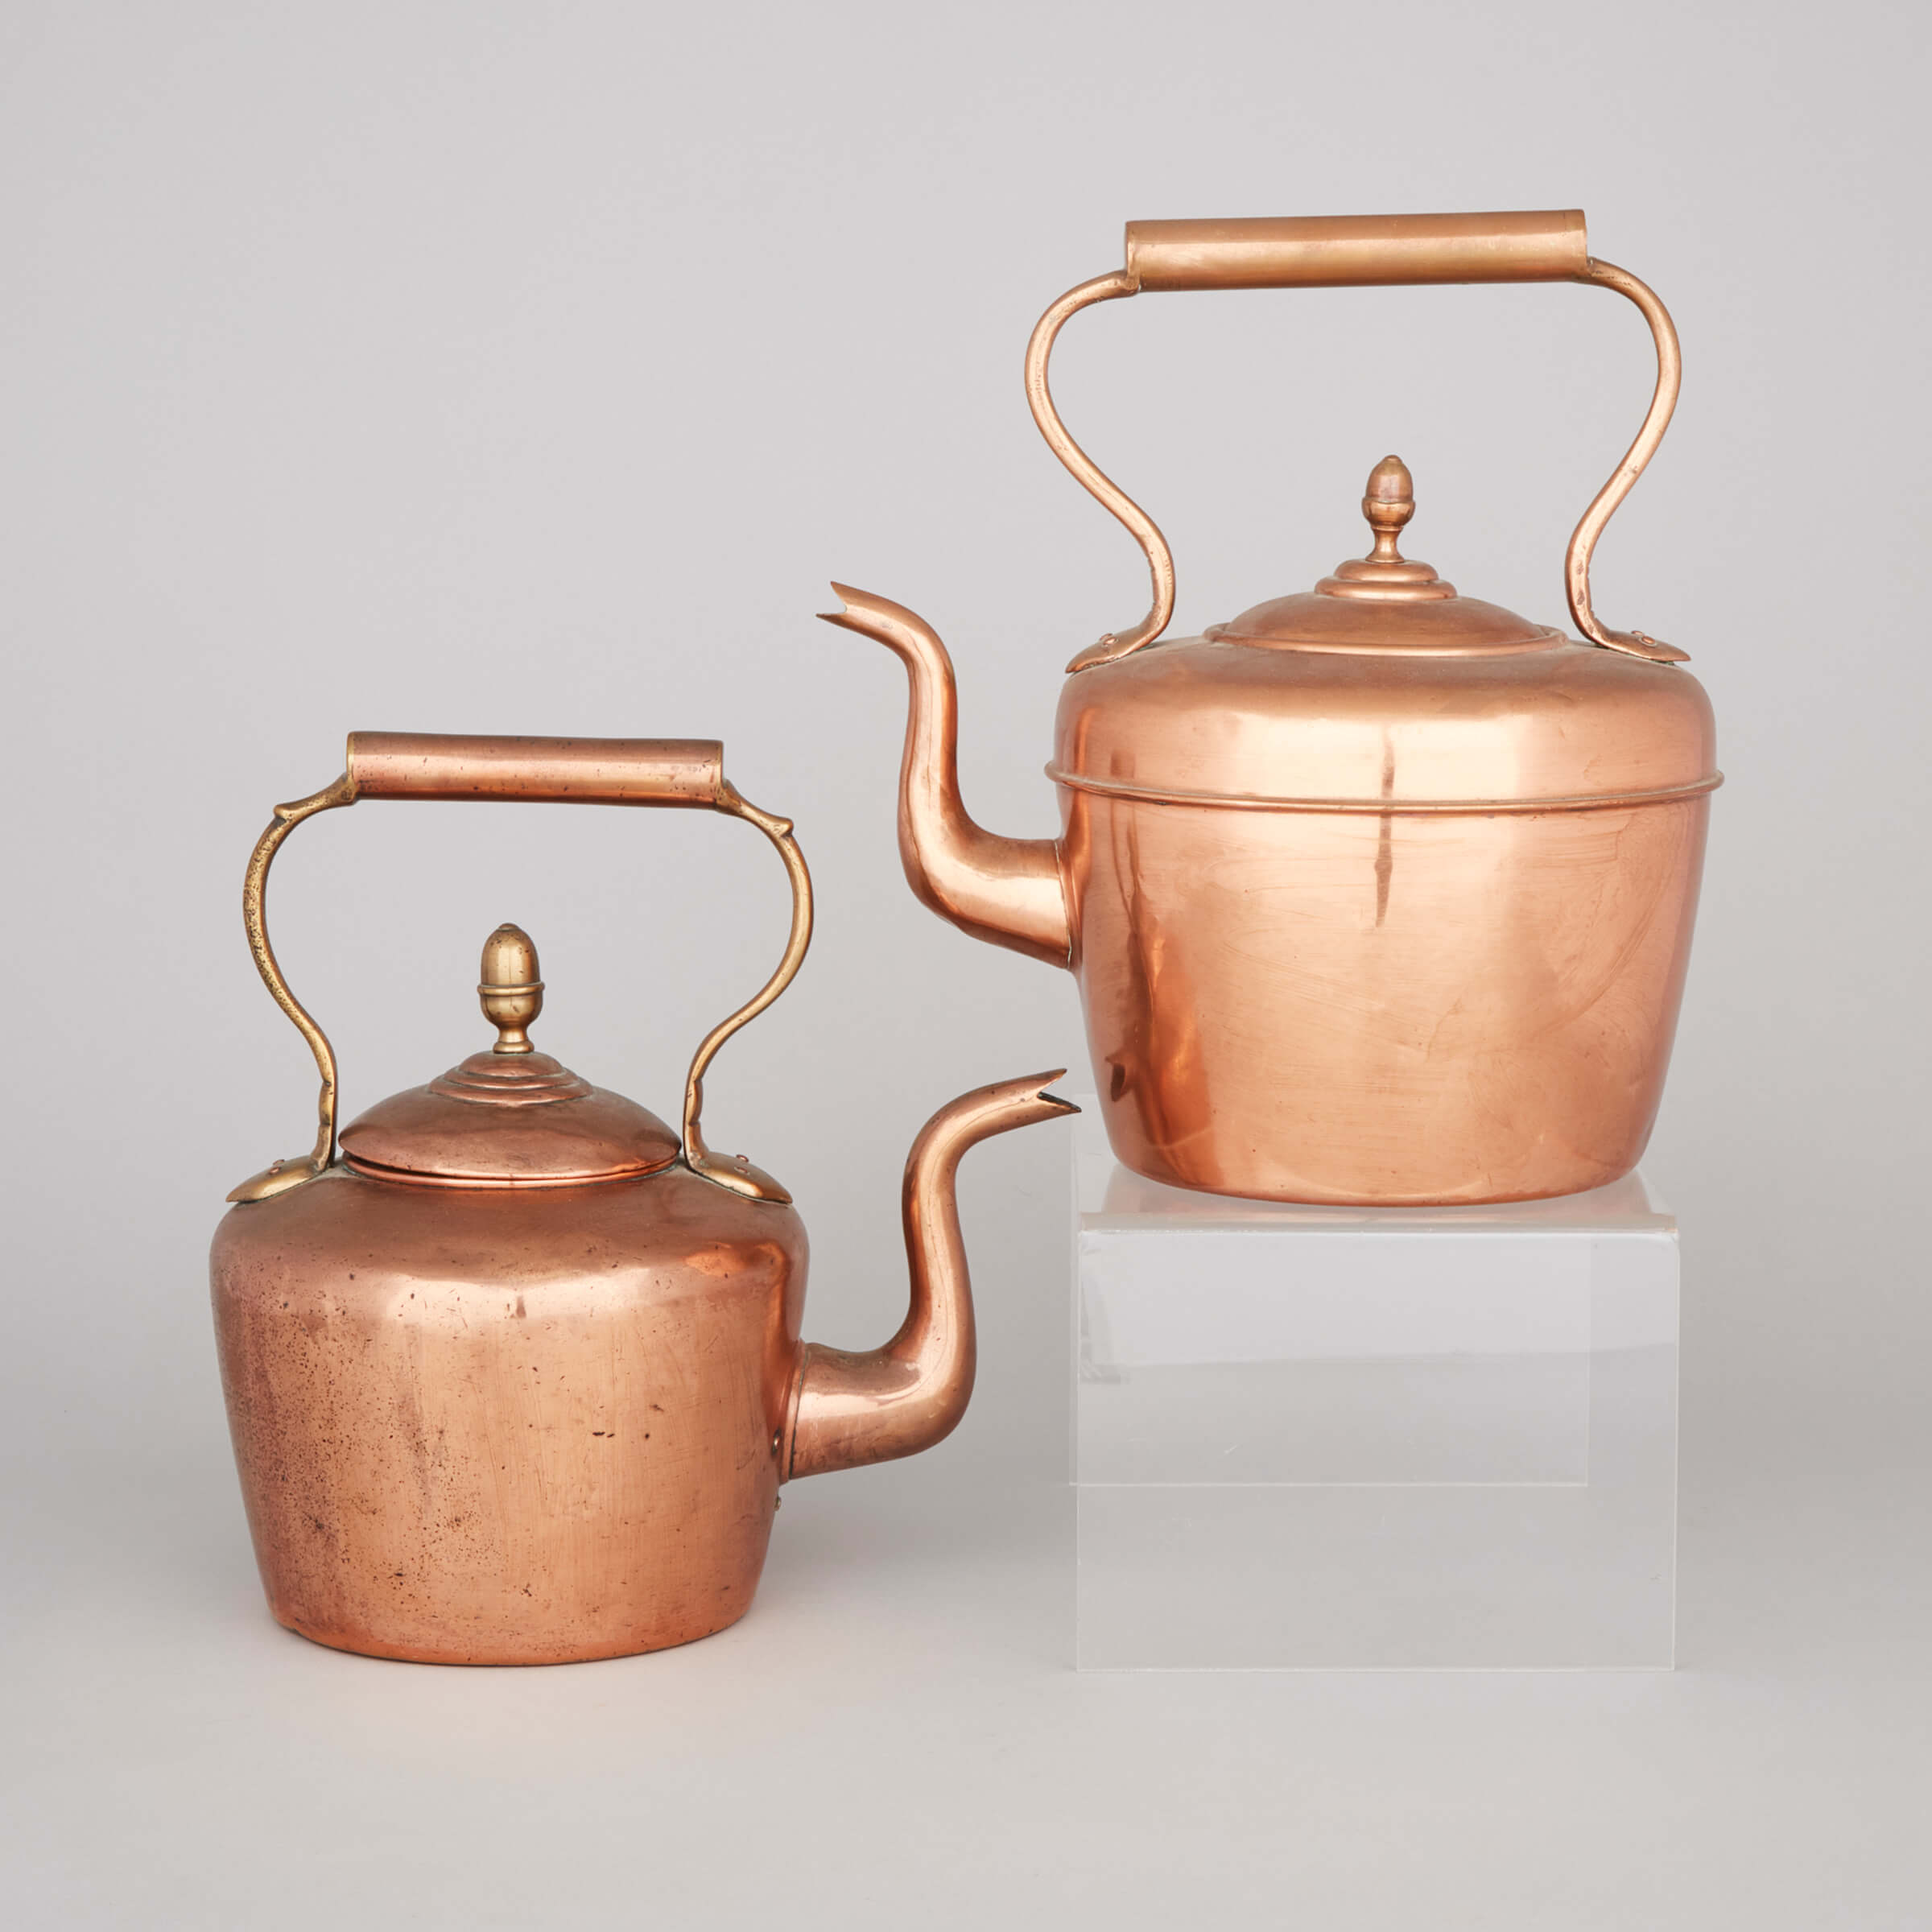 Two Large Victorian Copper Gooseneck Kettles, 19th century